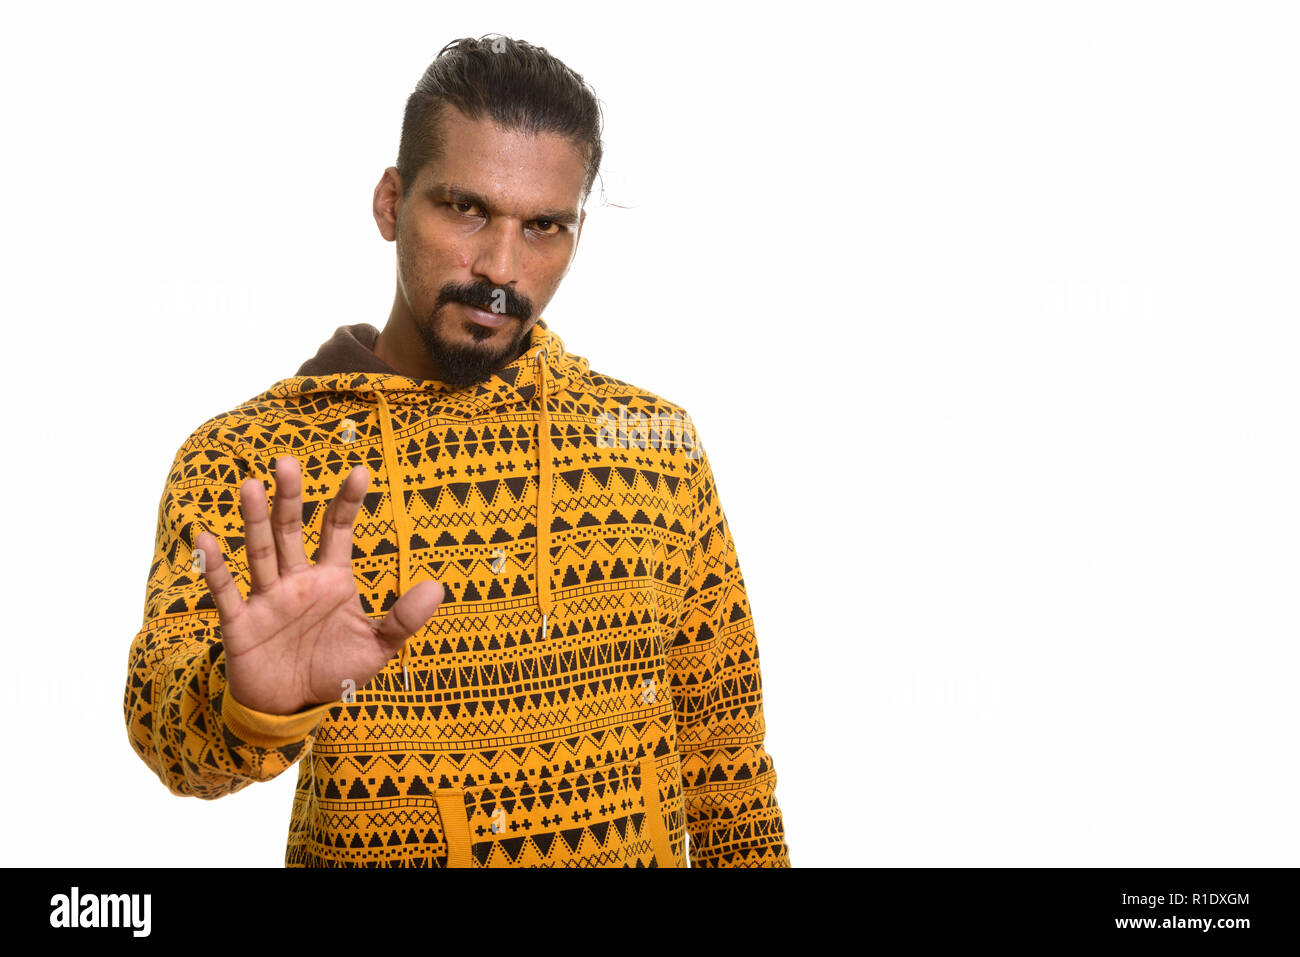 Young Indian man with stop hand gesture Stock Photo